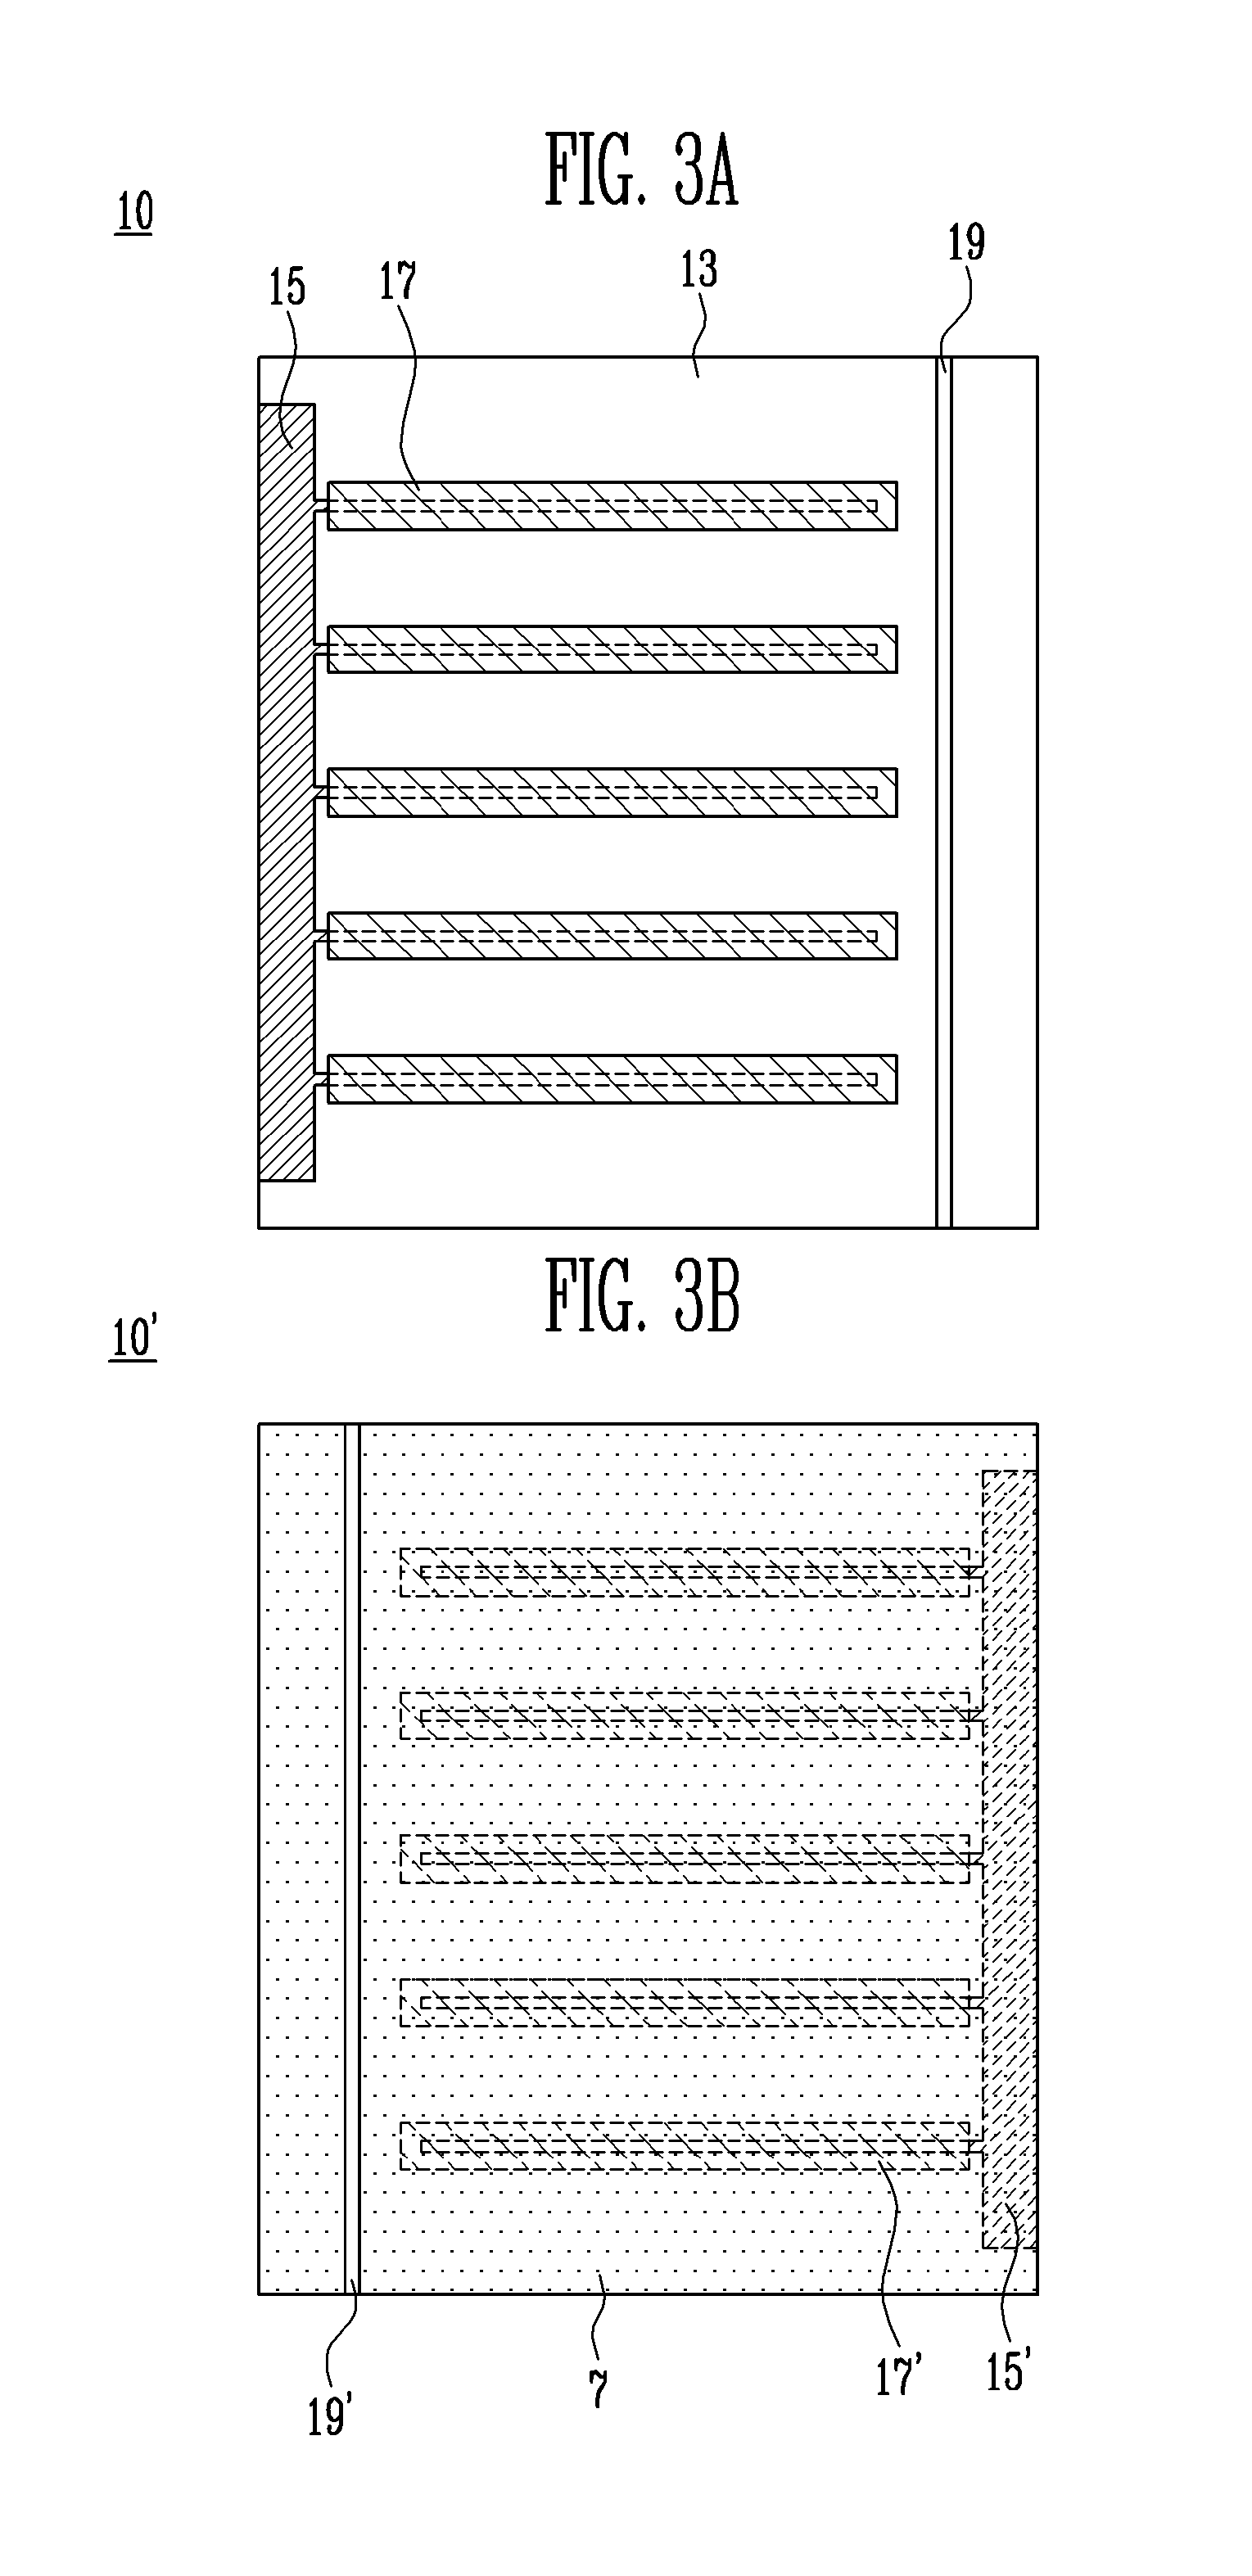 Photoelectric conversion device and method of preparing the same